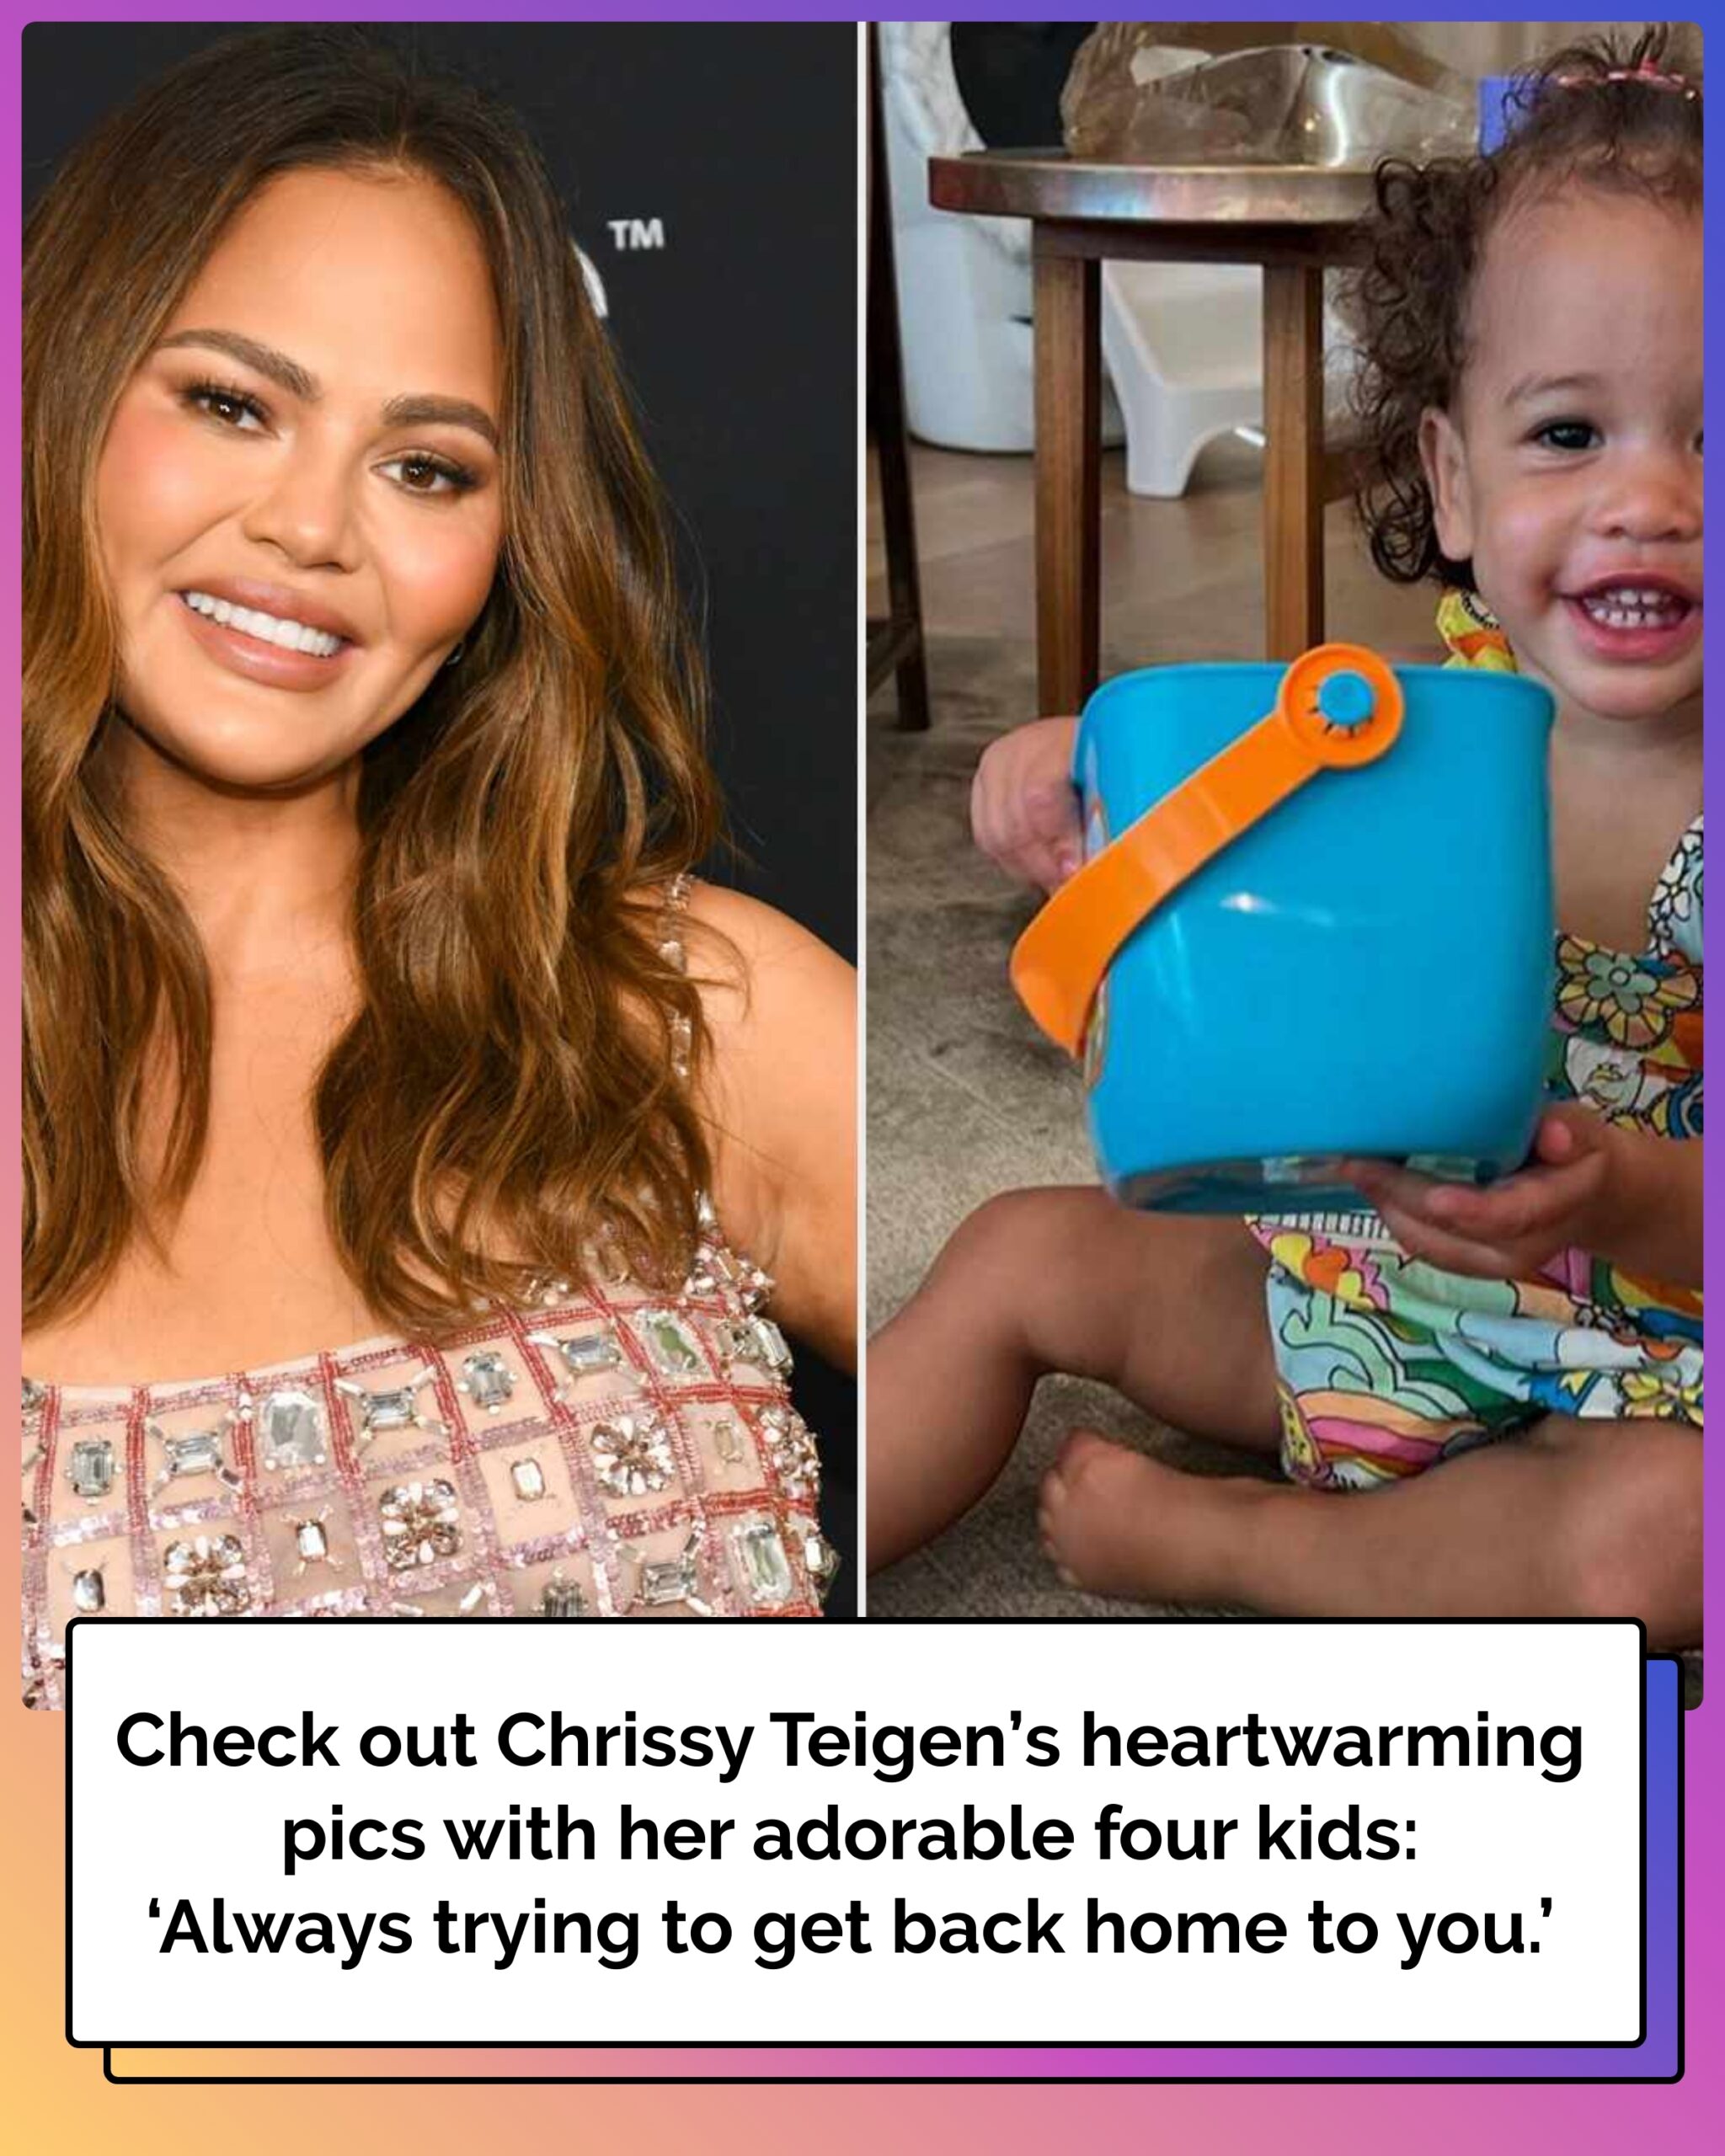 Chrissy Teigen Shares Adorable Photos of All 4 of Her Kids: ‘Always Trying to Get Back Home to You’